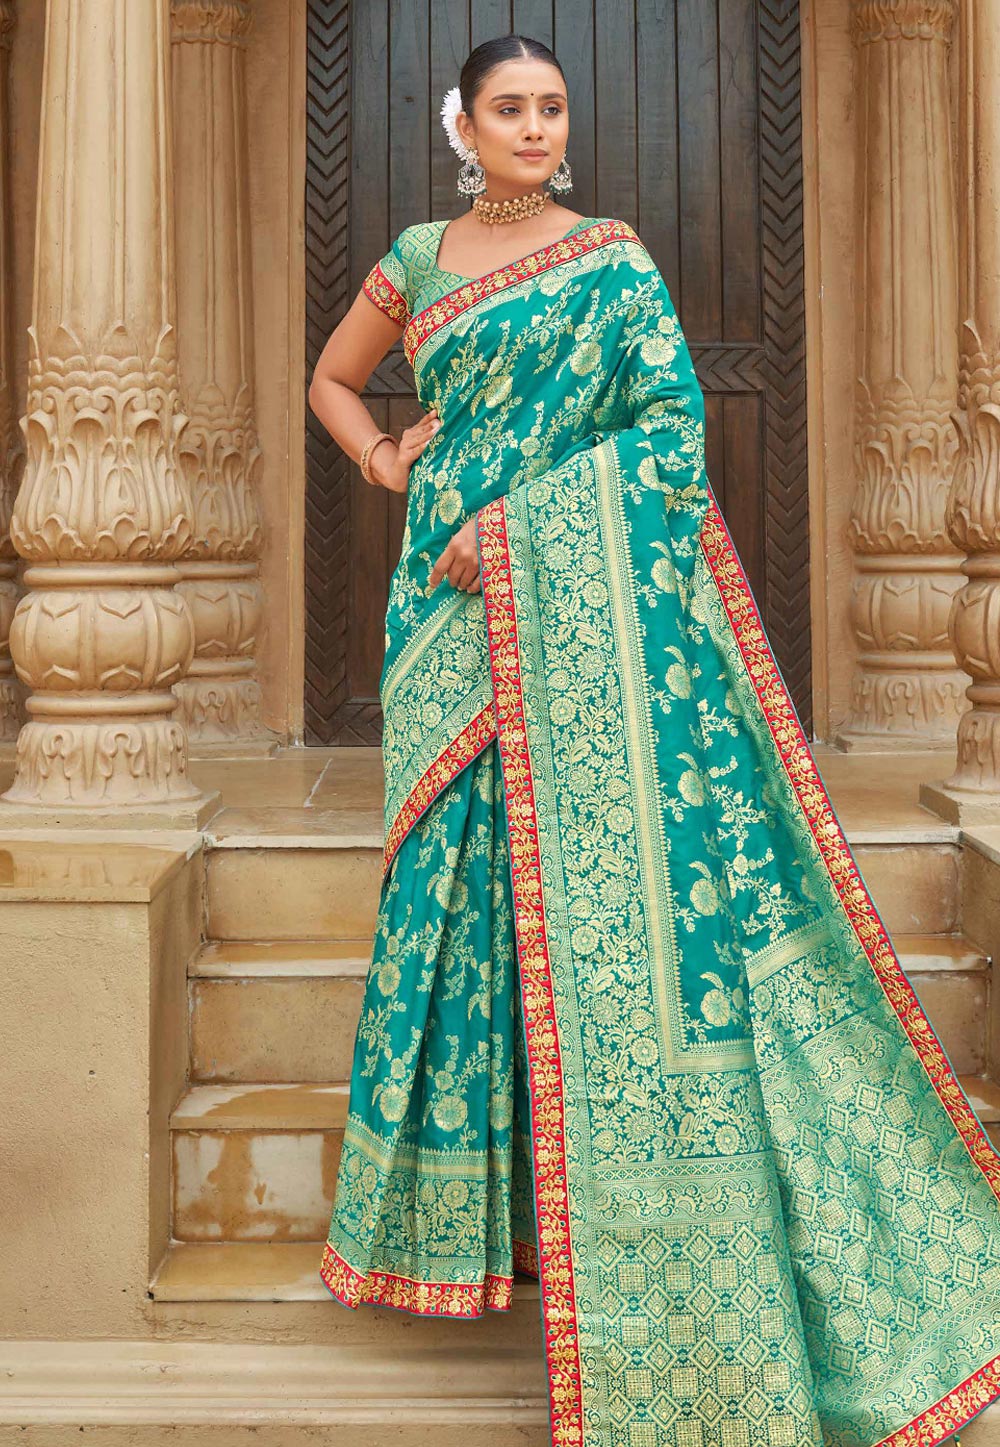 Buy Now Latest Indian Sea Green Sarees Online At Affordable Prices!